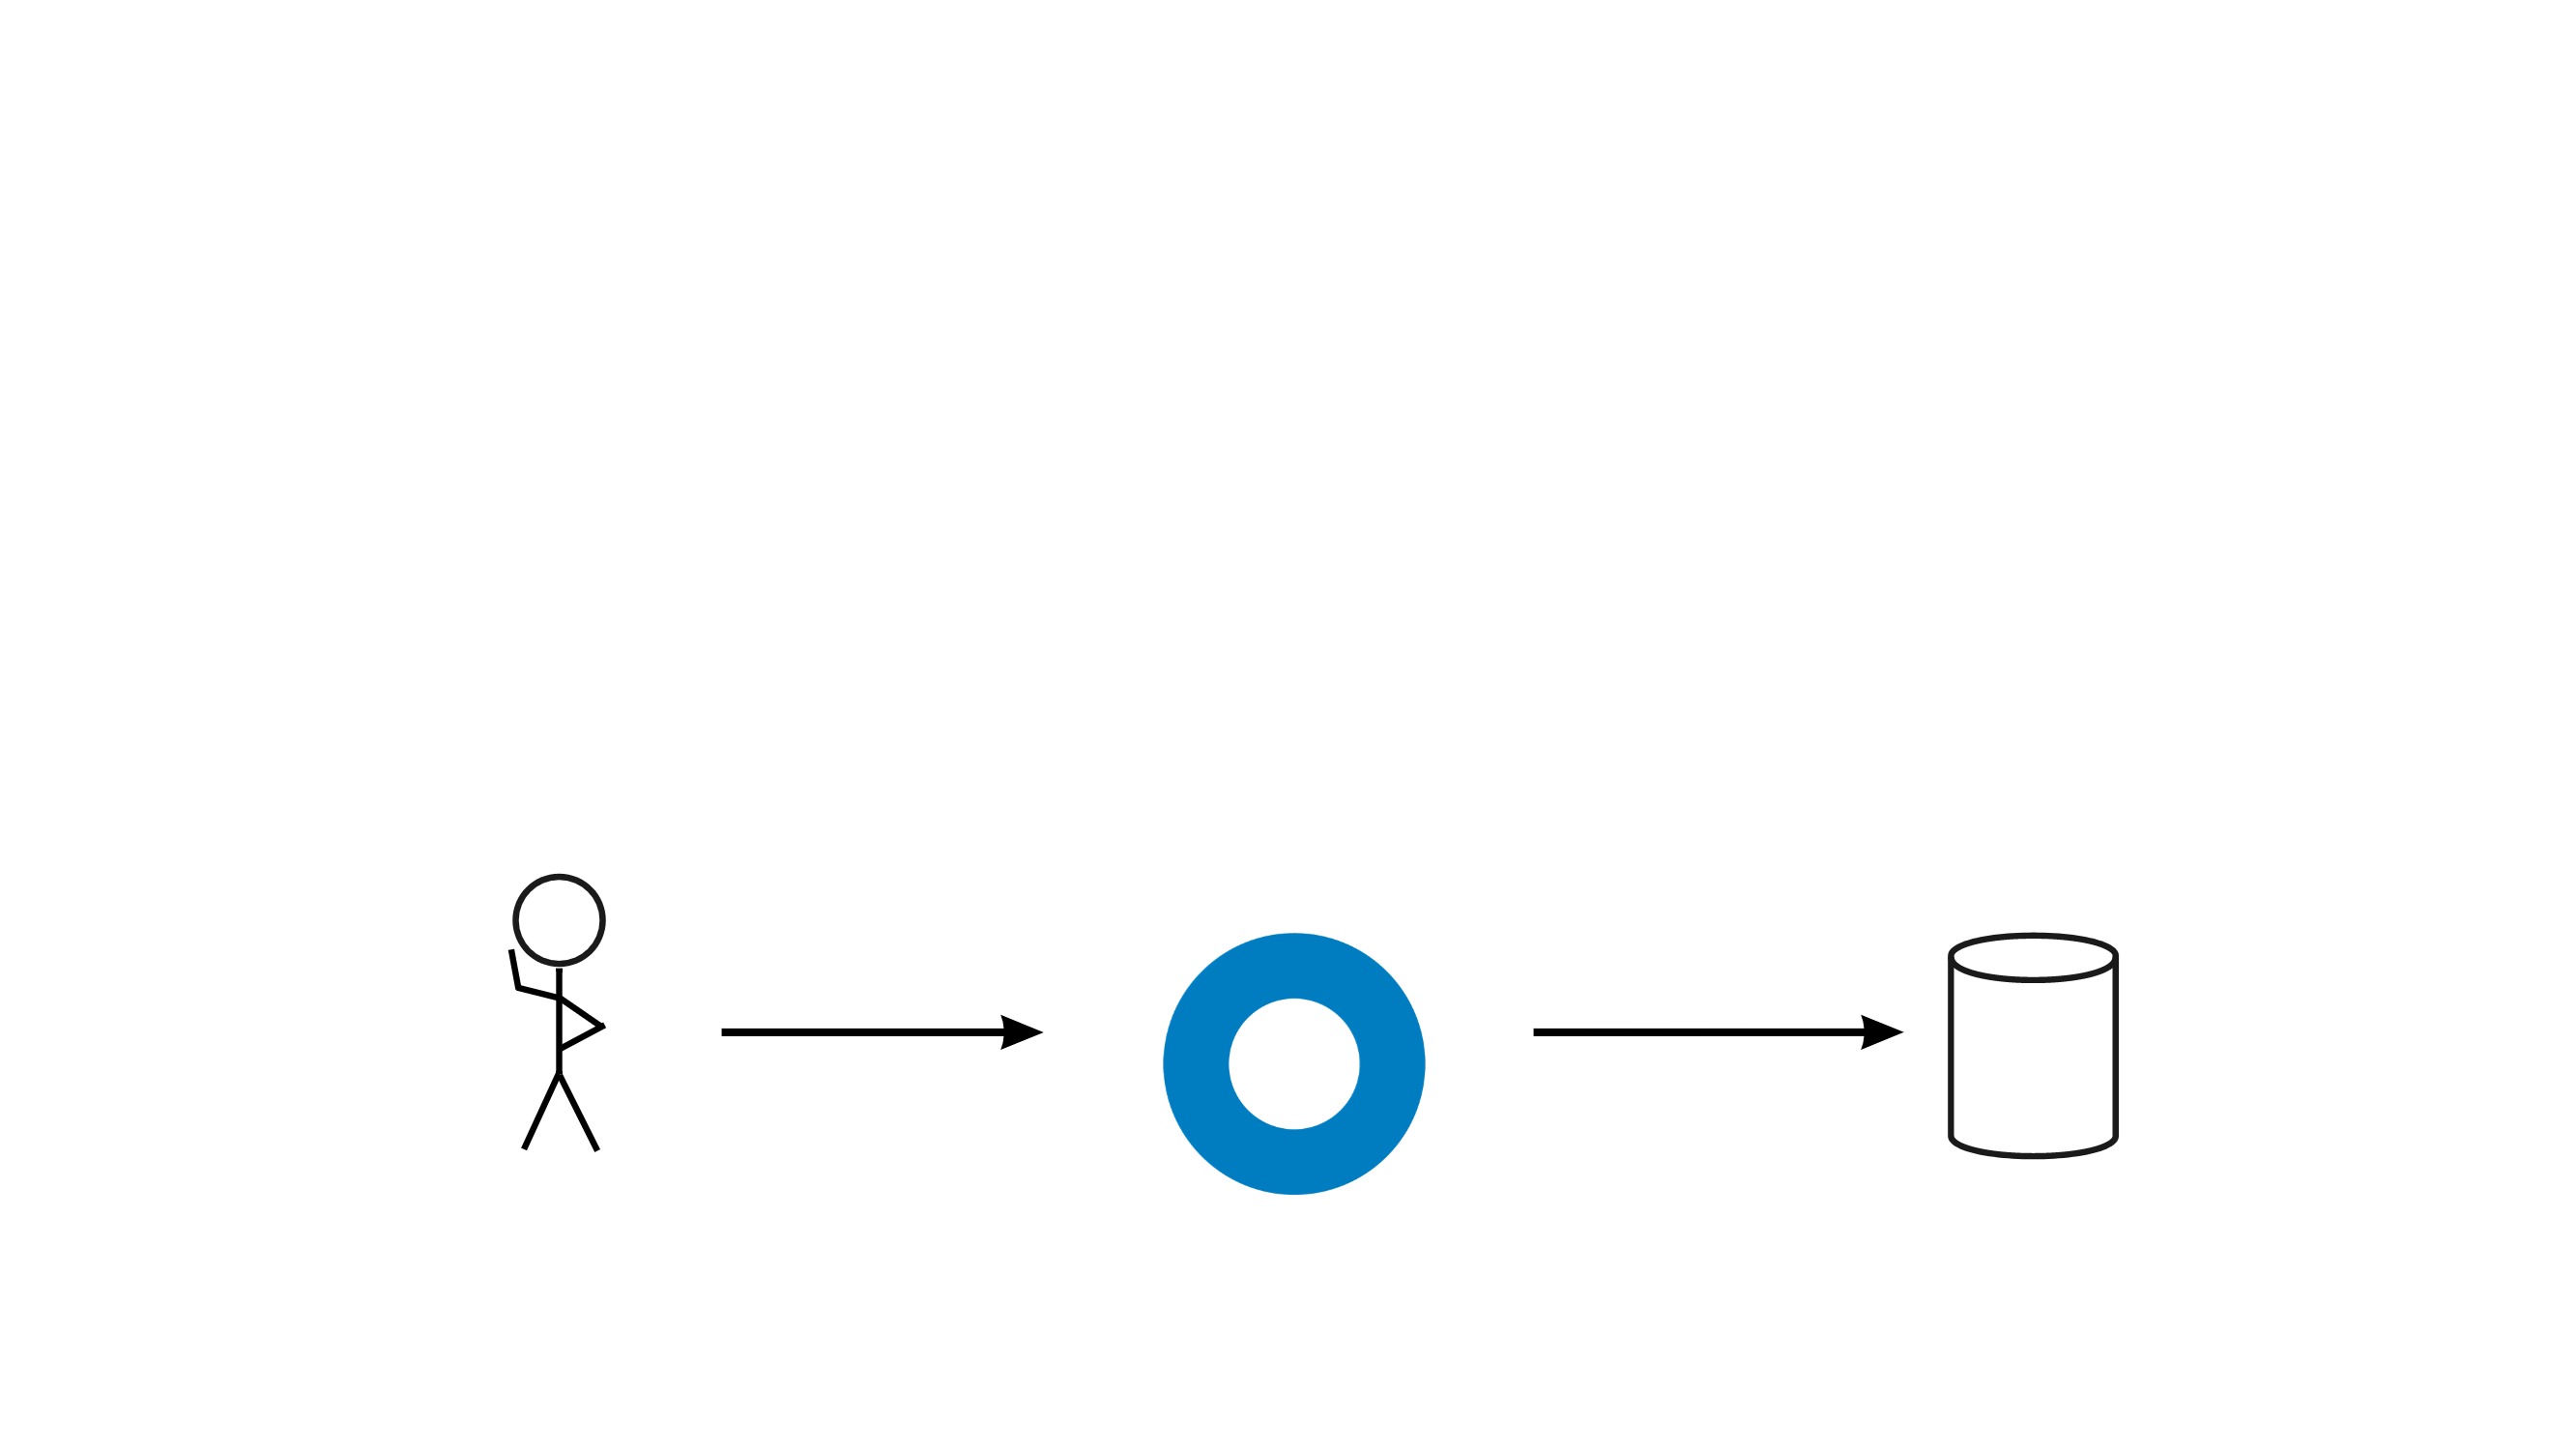 Diagram of our product sitting between a person and a resource